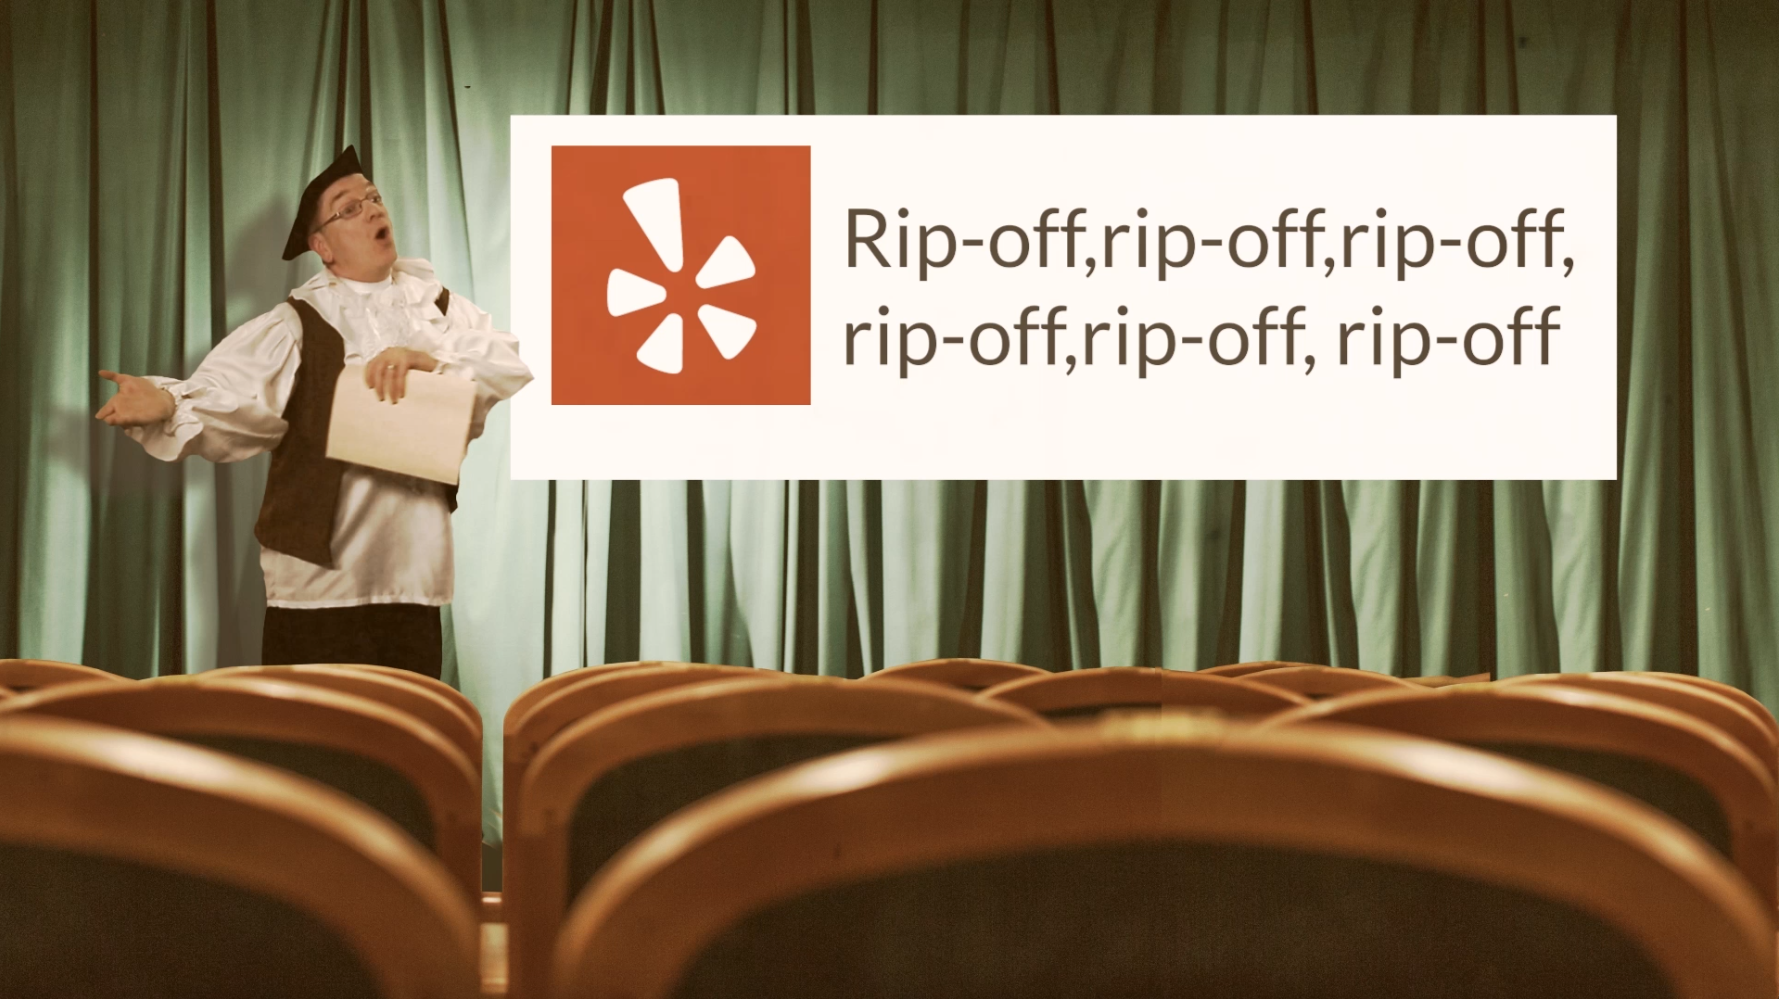 Reputation Management Theater – Rip-off, Rip-off, Rip-off